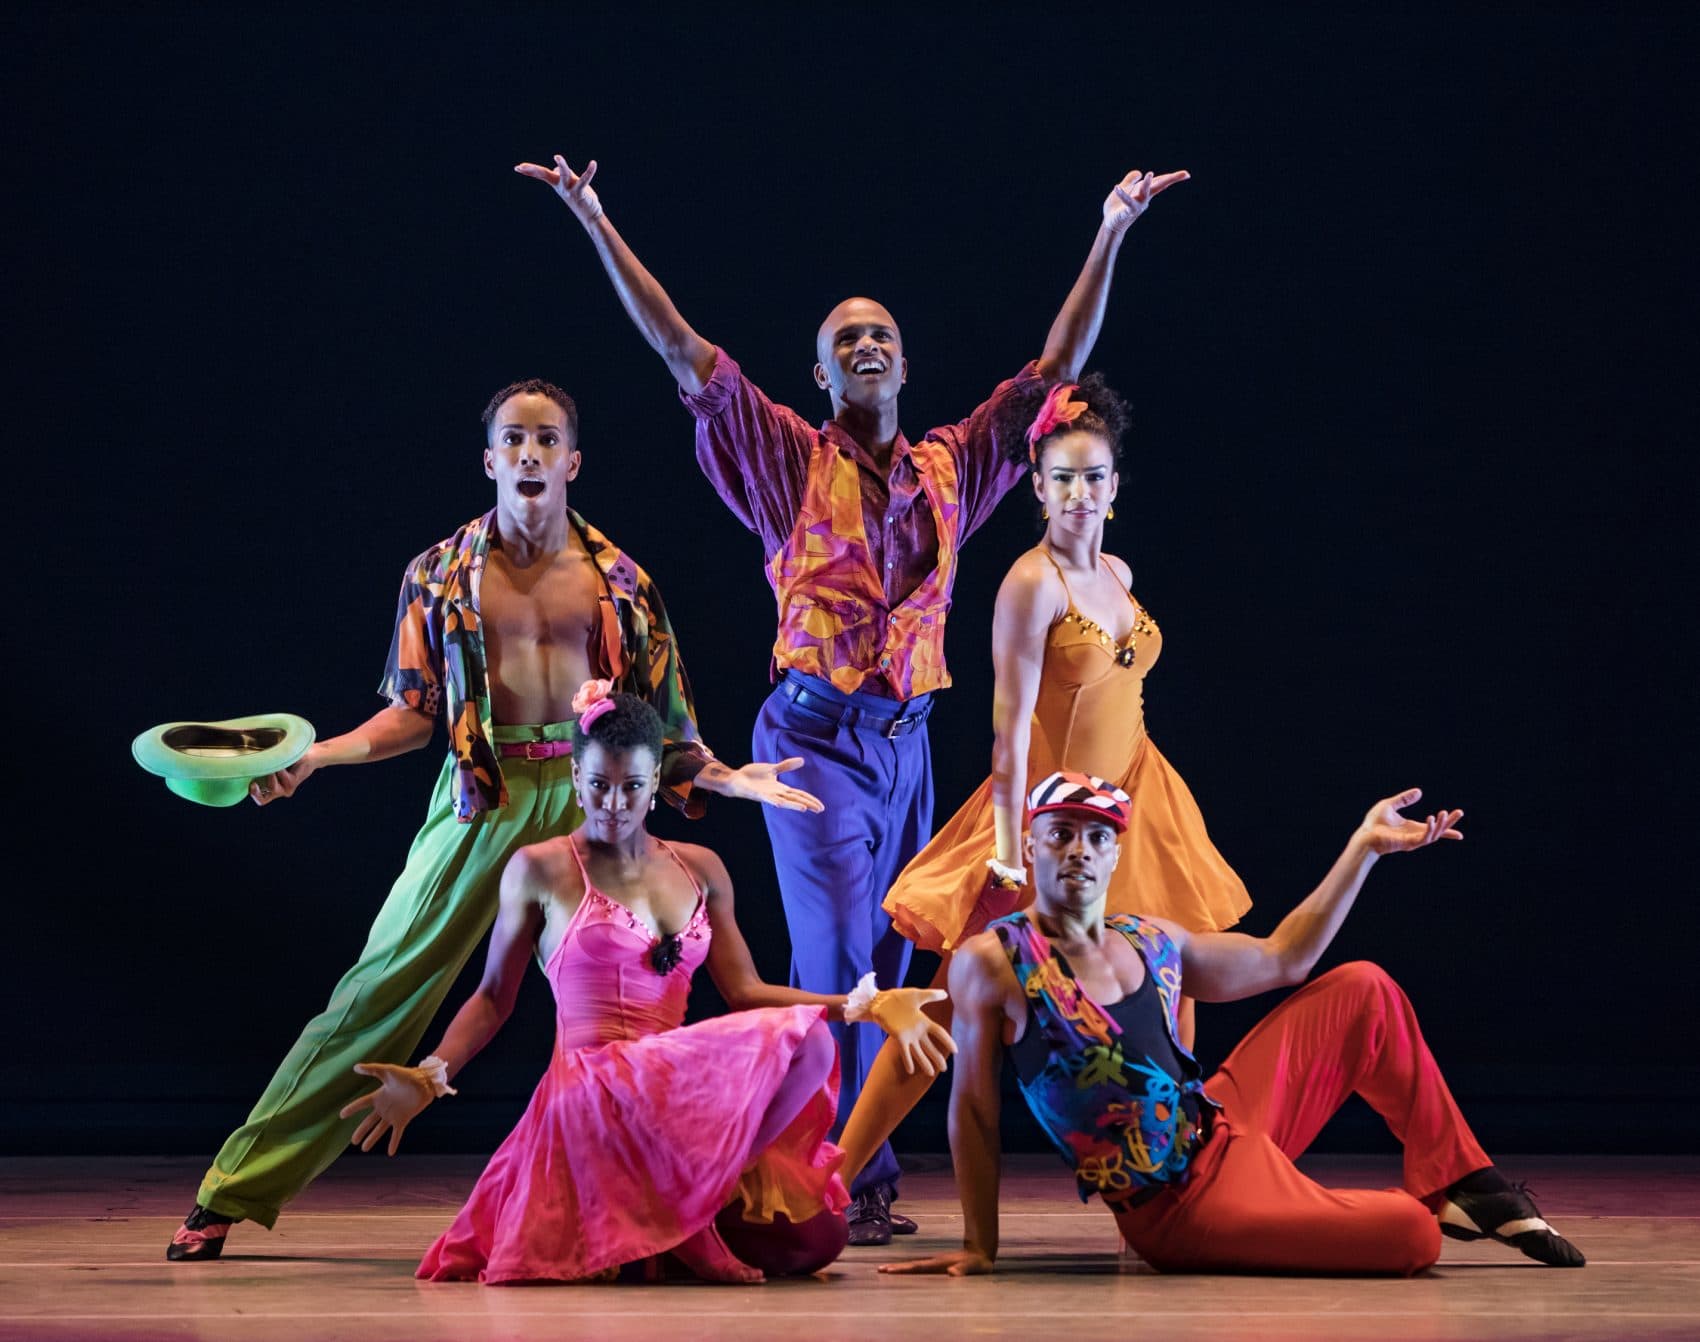 From Boston Arts Academy To Alvin Ailey, Local Dancer Finds Success